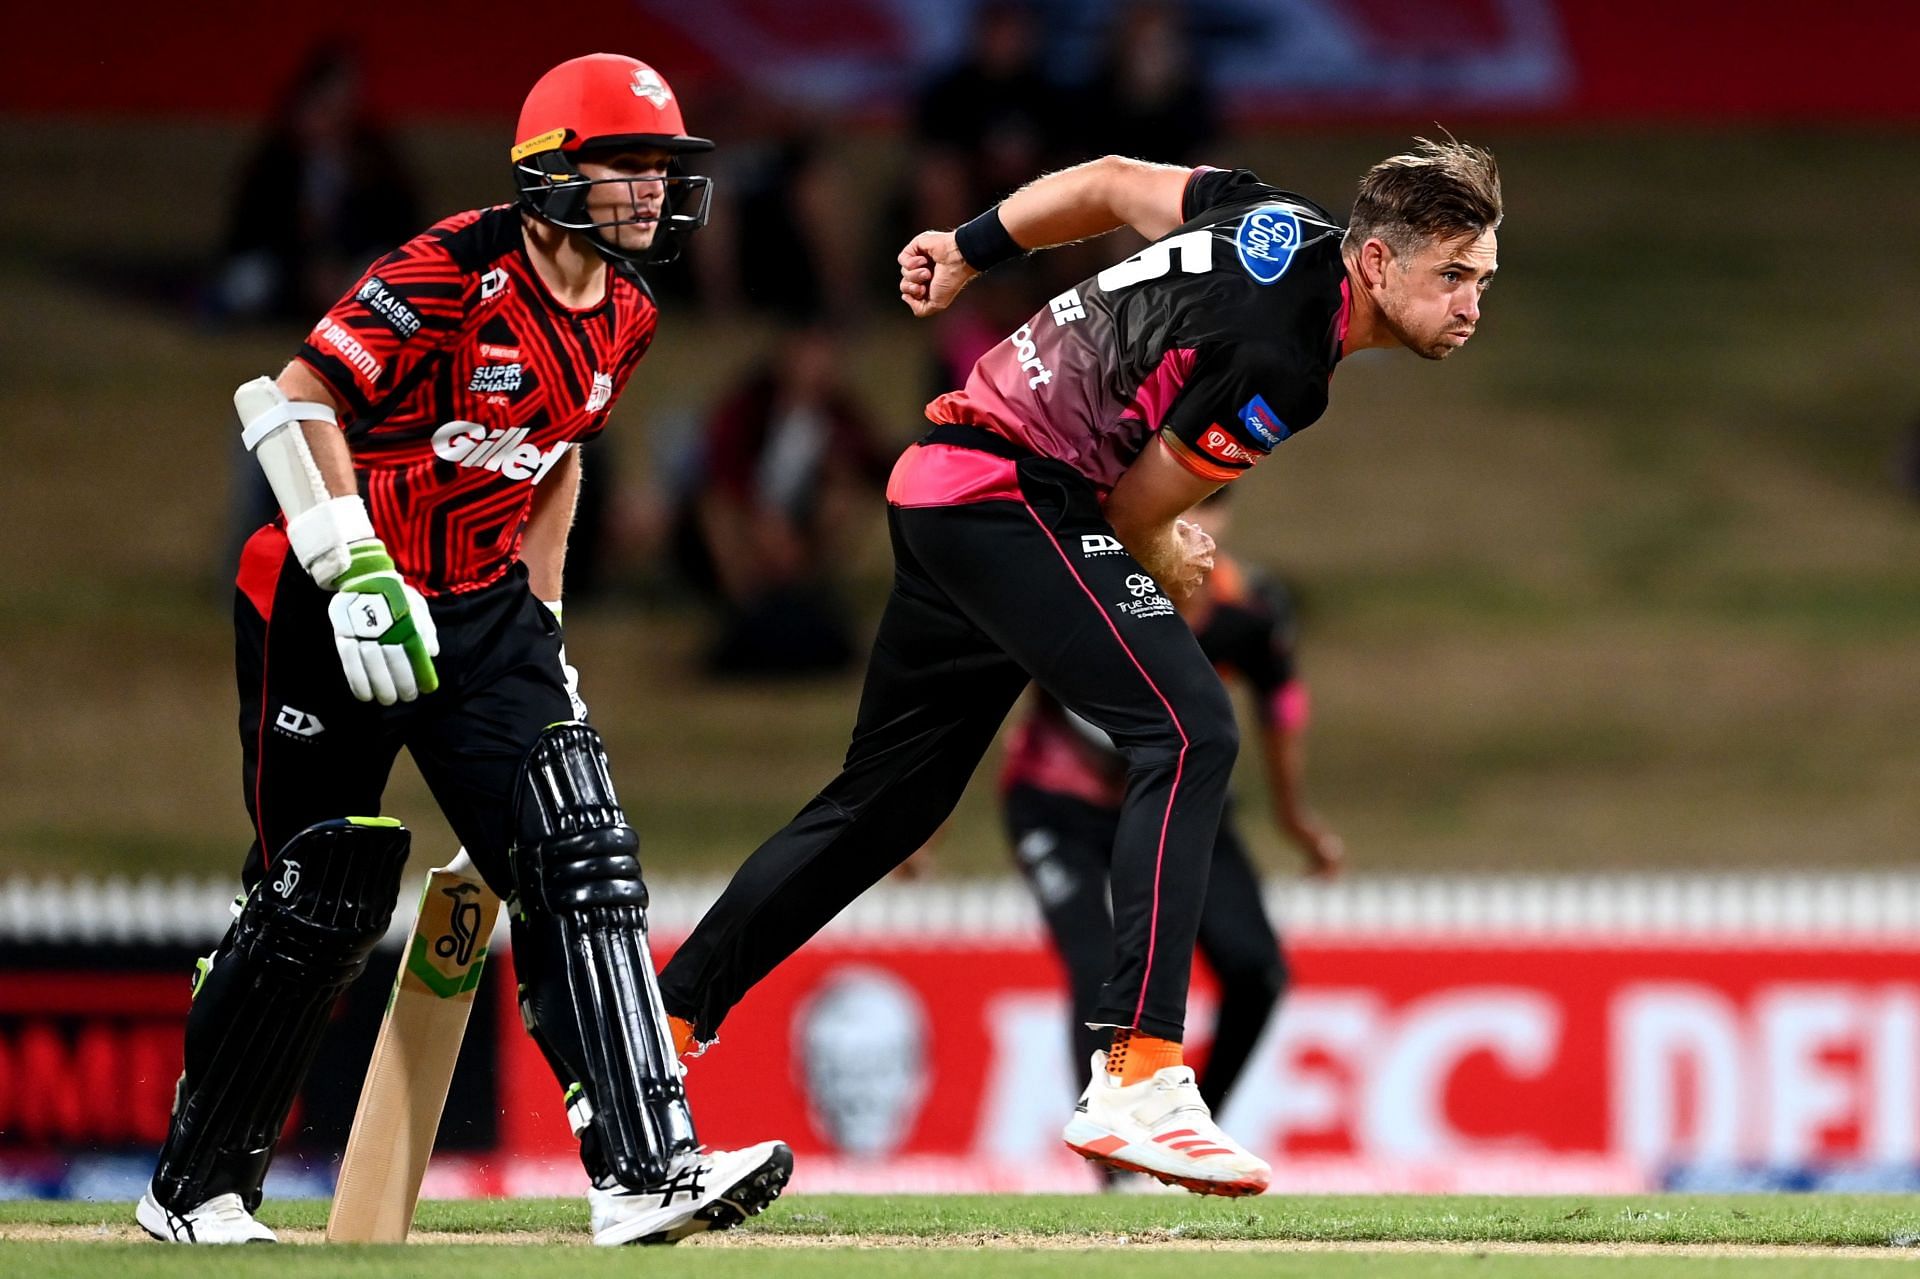 Tim Southee bowls during the Super Smash final. Pic: Getty Images